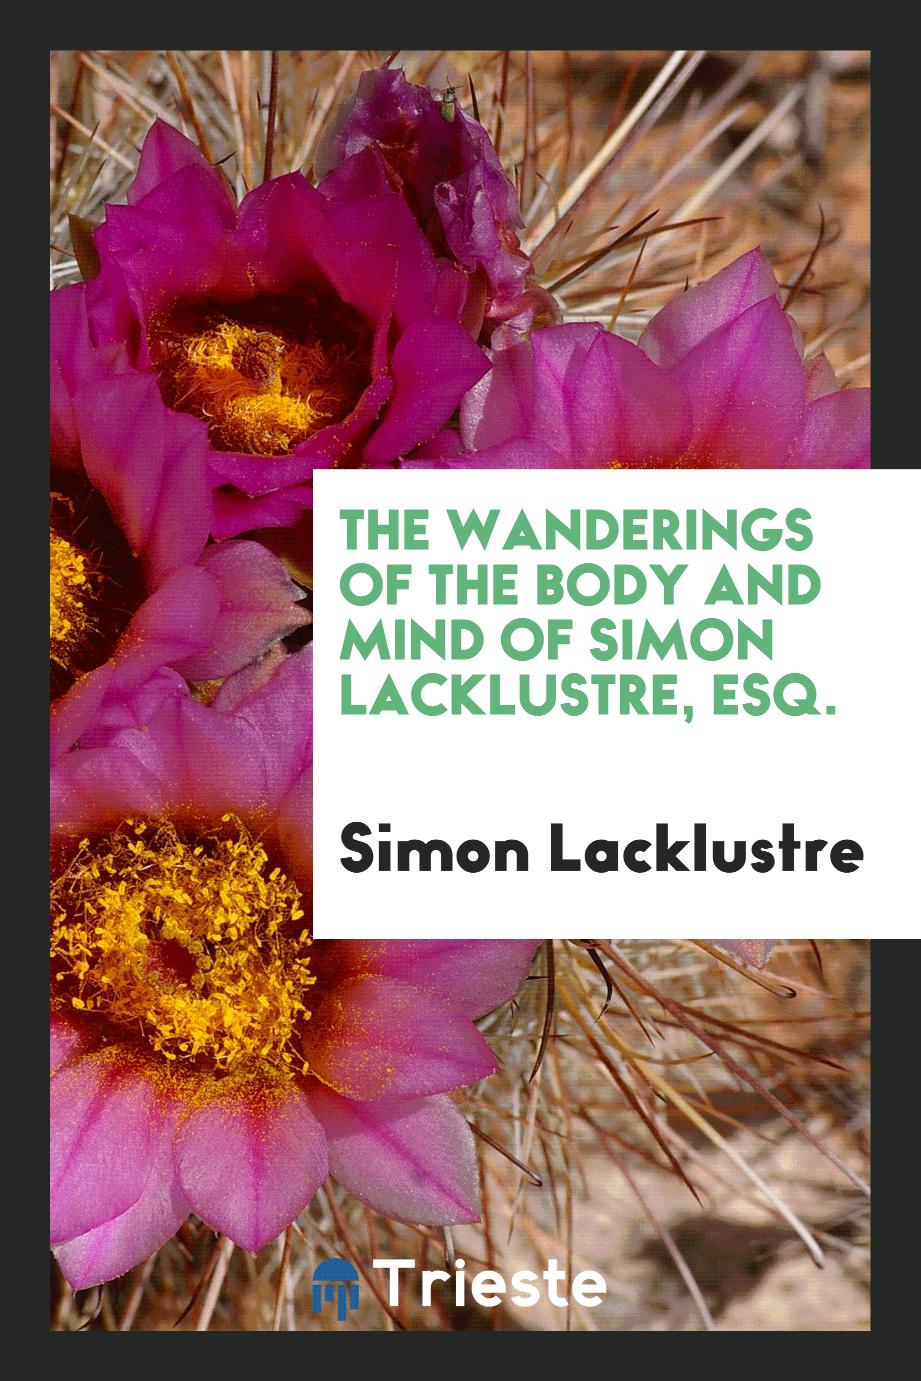 The wanderings of the body and mind of Simon Lacklustre, esq.